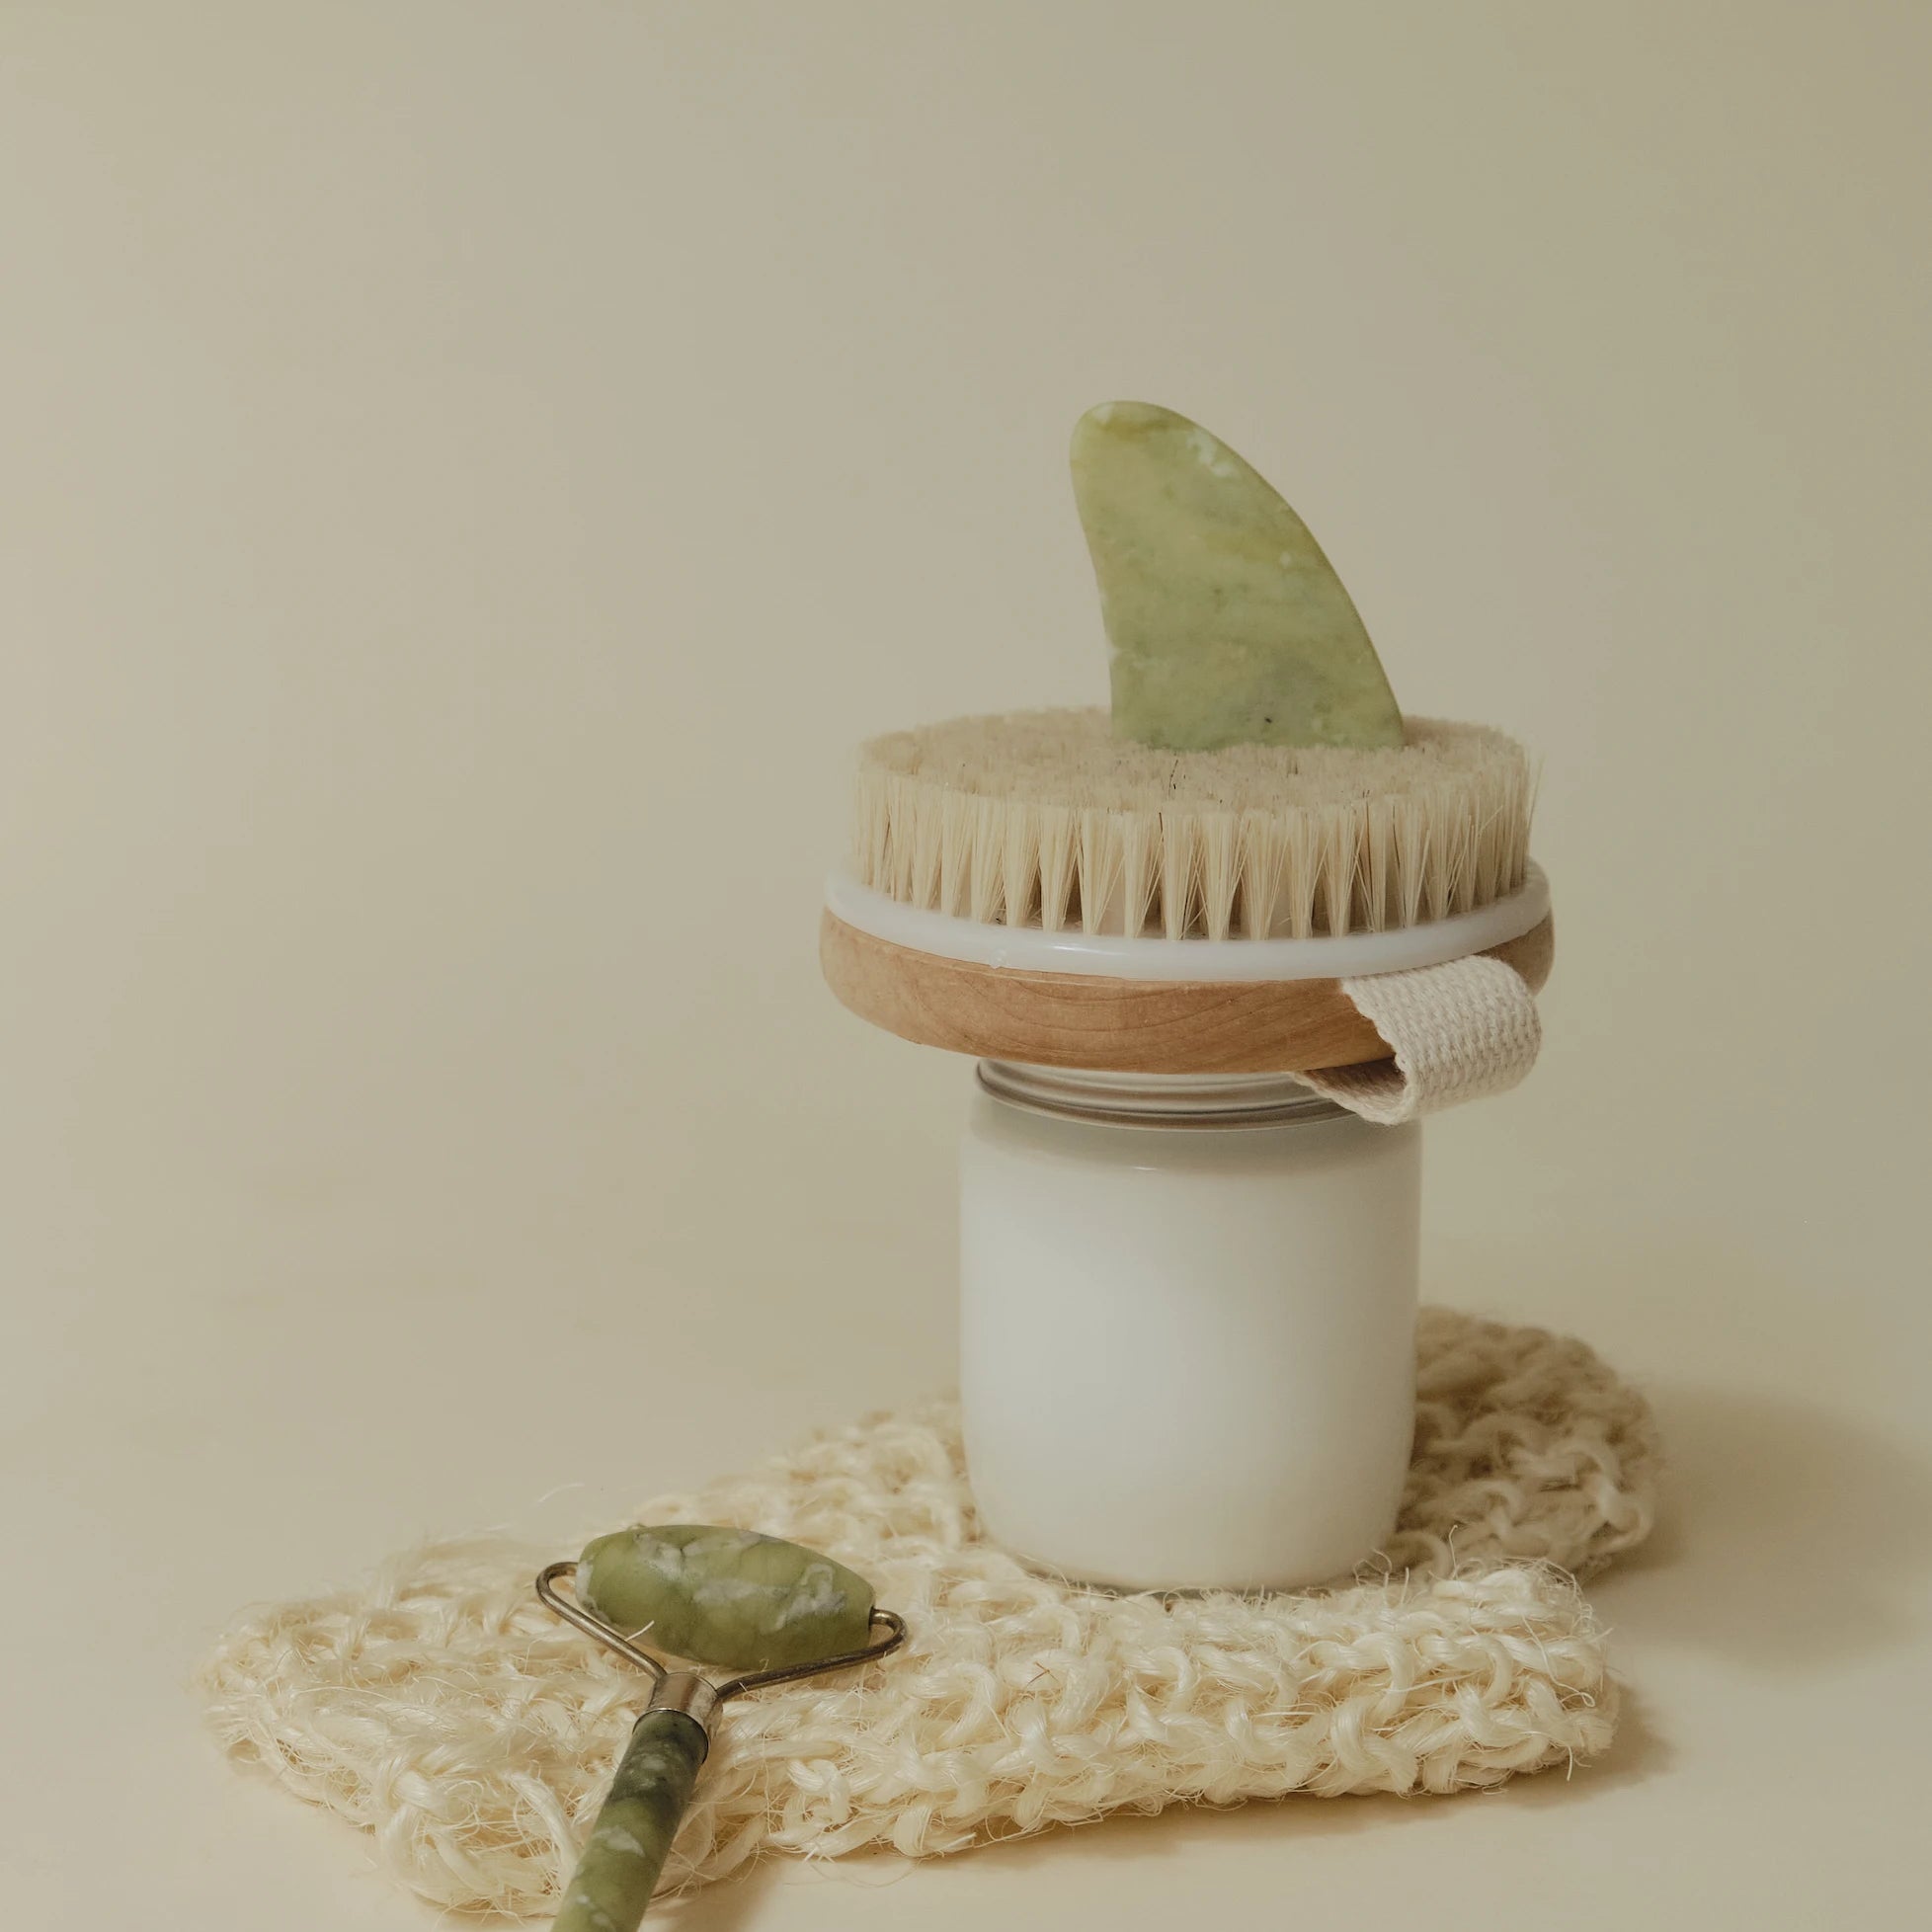 An image of a dry body brush and a green facial roller